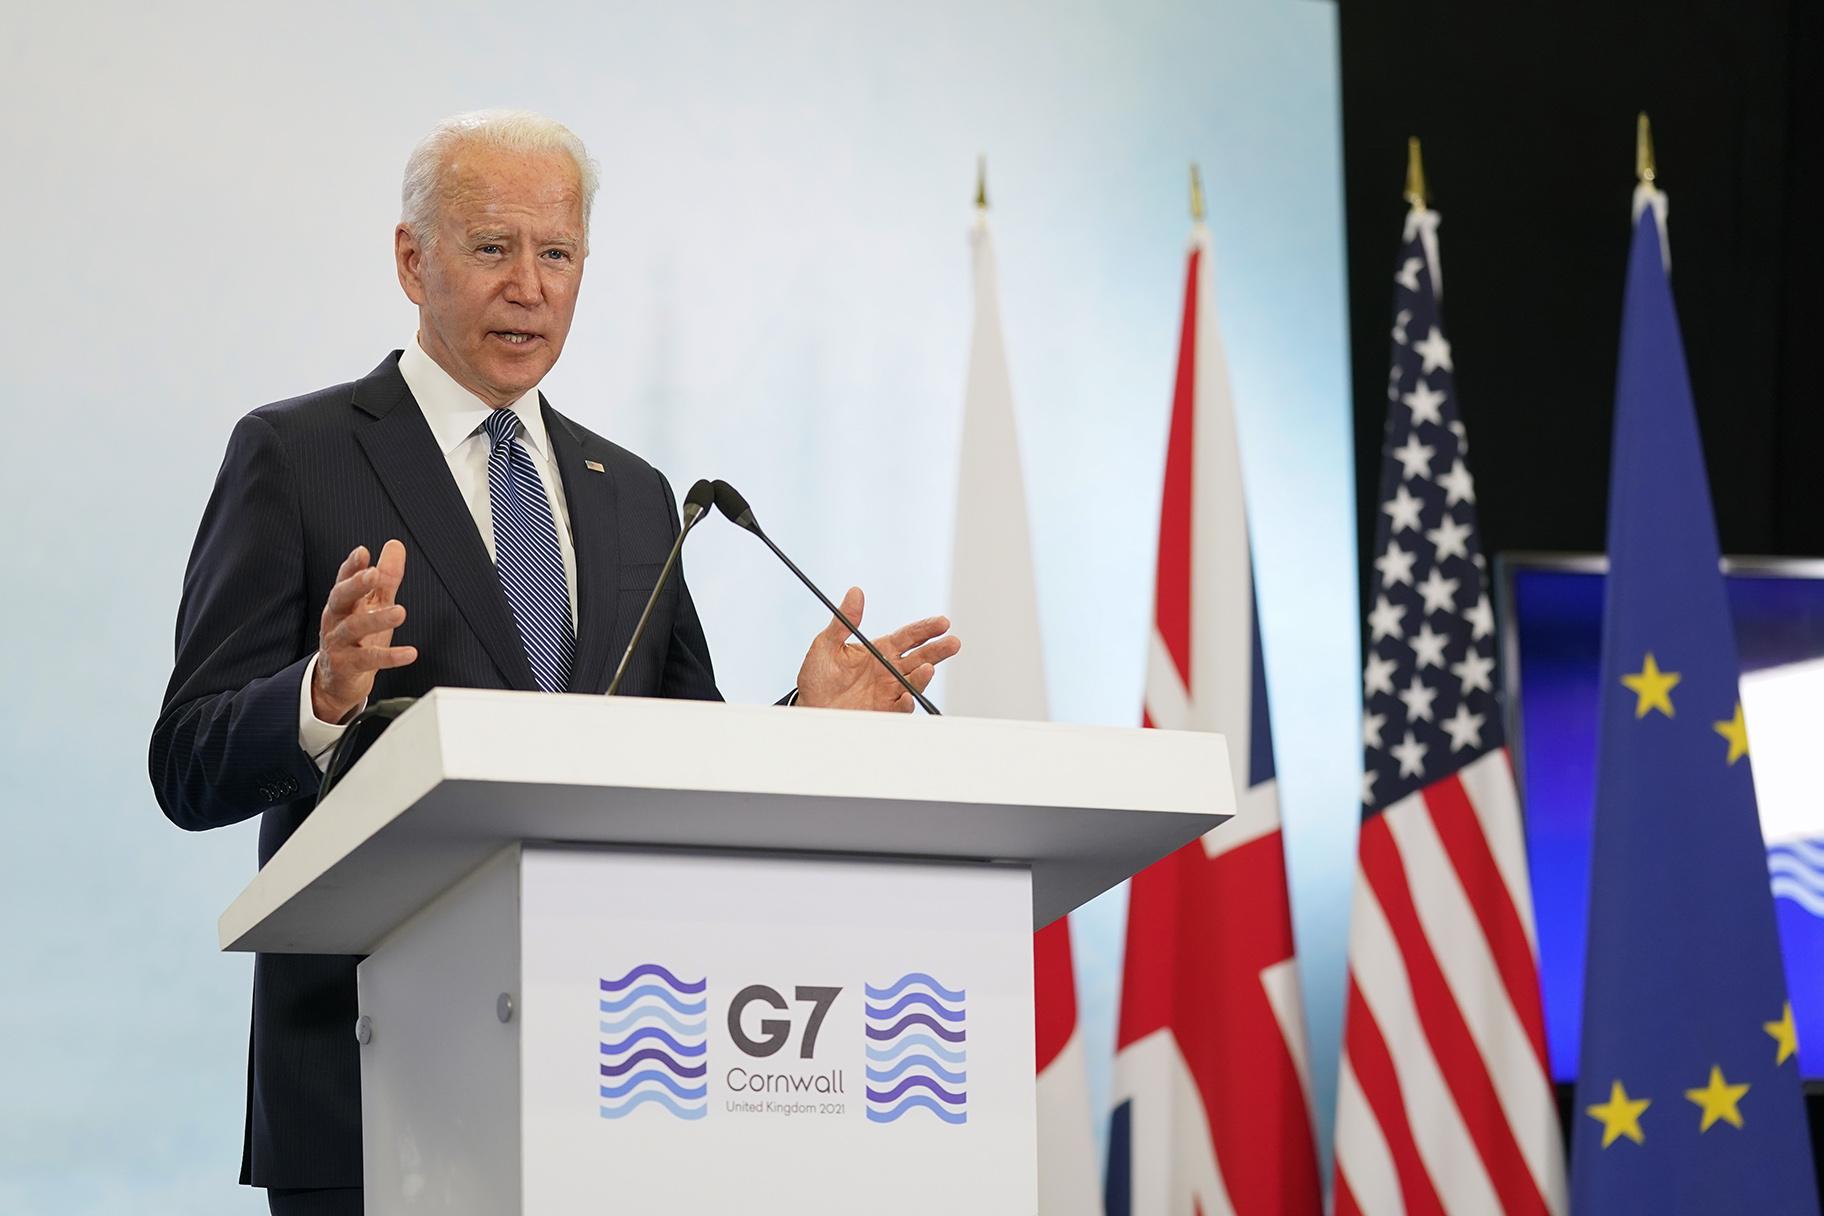 President Joe Biden speaks during a news conference after attending the G-7 summit, Sunday, June 13, 2021, at Cornwall Airport in Newquay, England. (AP Photo / Patrick Semansky)